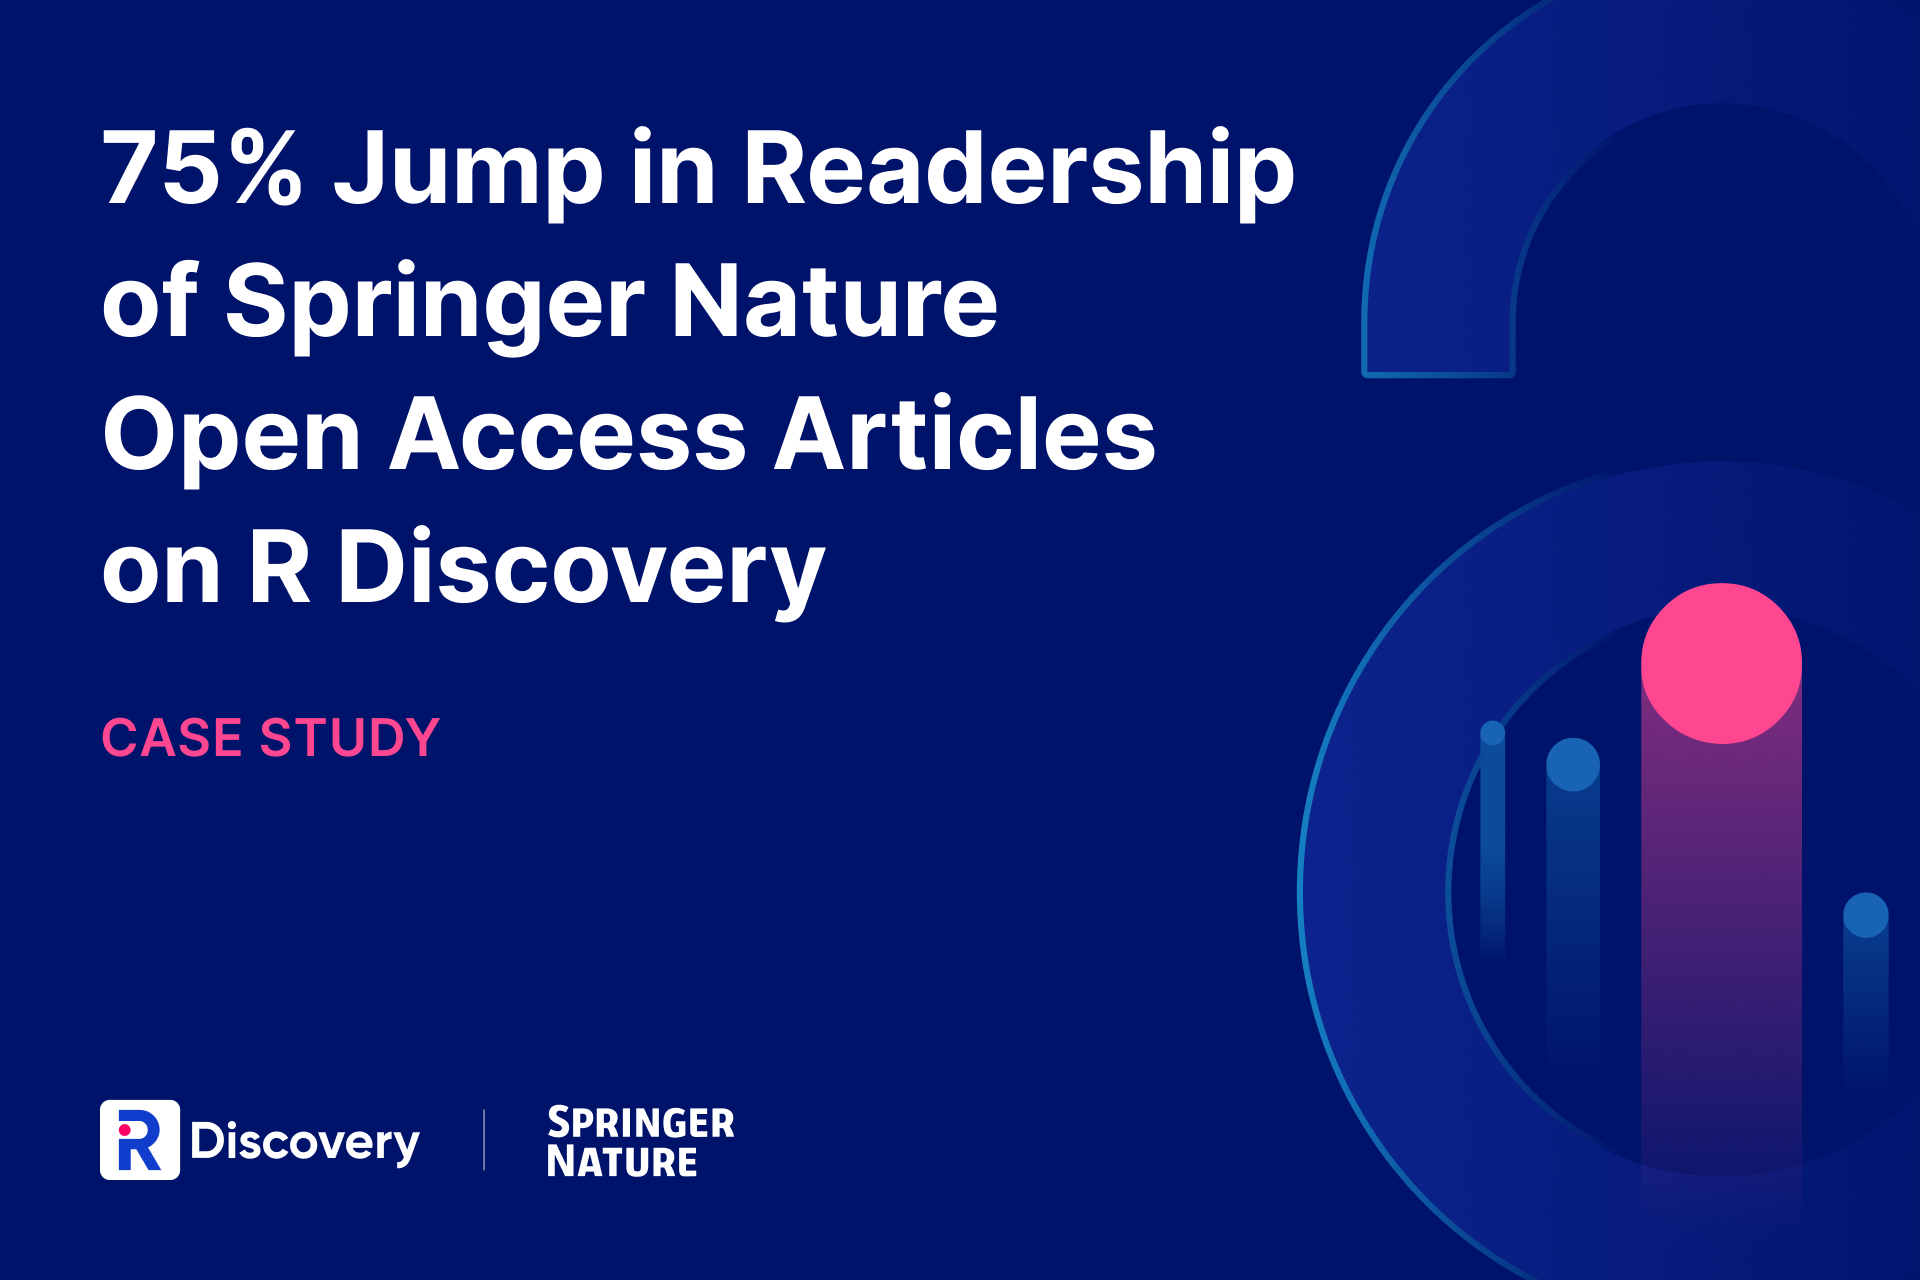 R Discovery Helps Springer Nature to Increase Readership of Open Access Articles by 75%